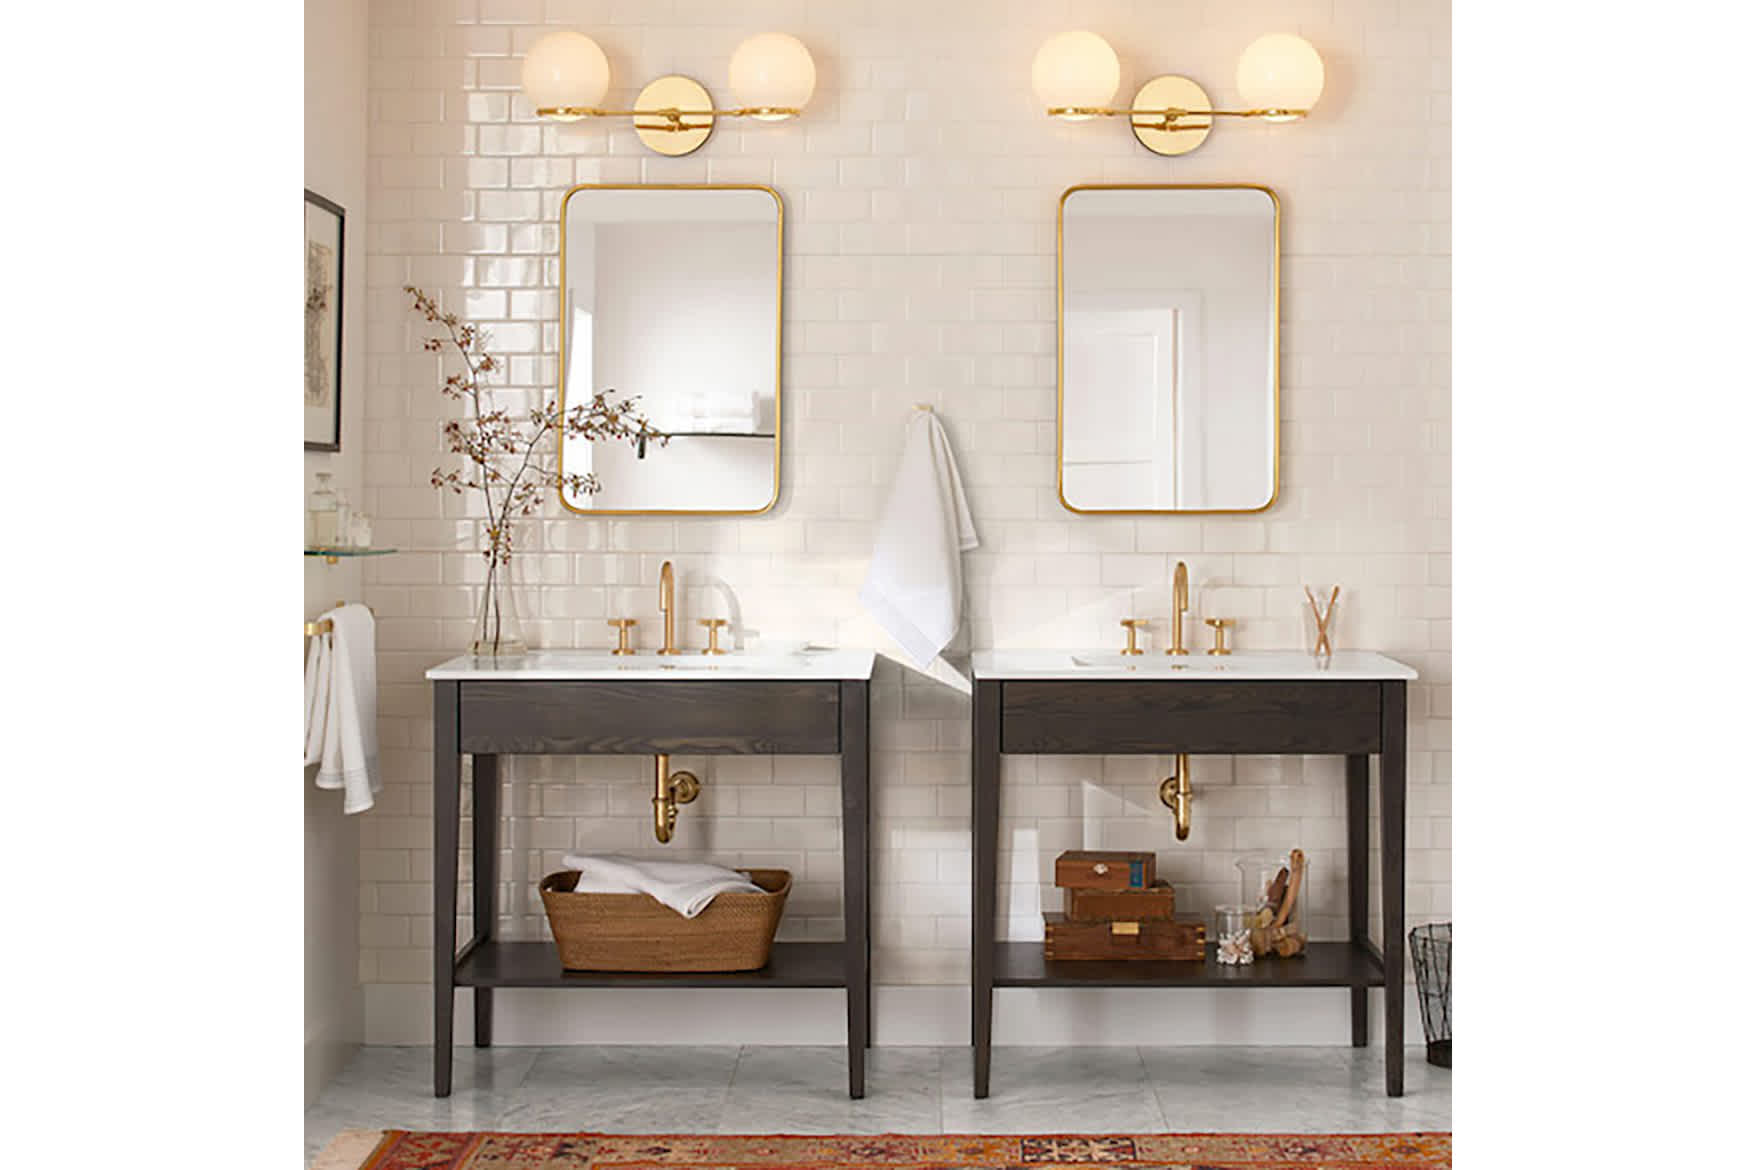 How Will You Light Up the Room? The Top 5 Bathroom Lighting Trends of